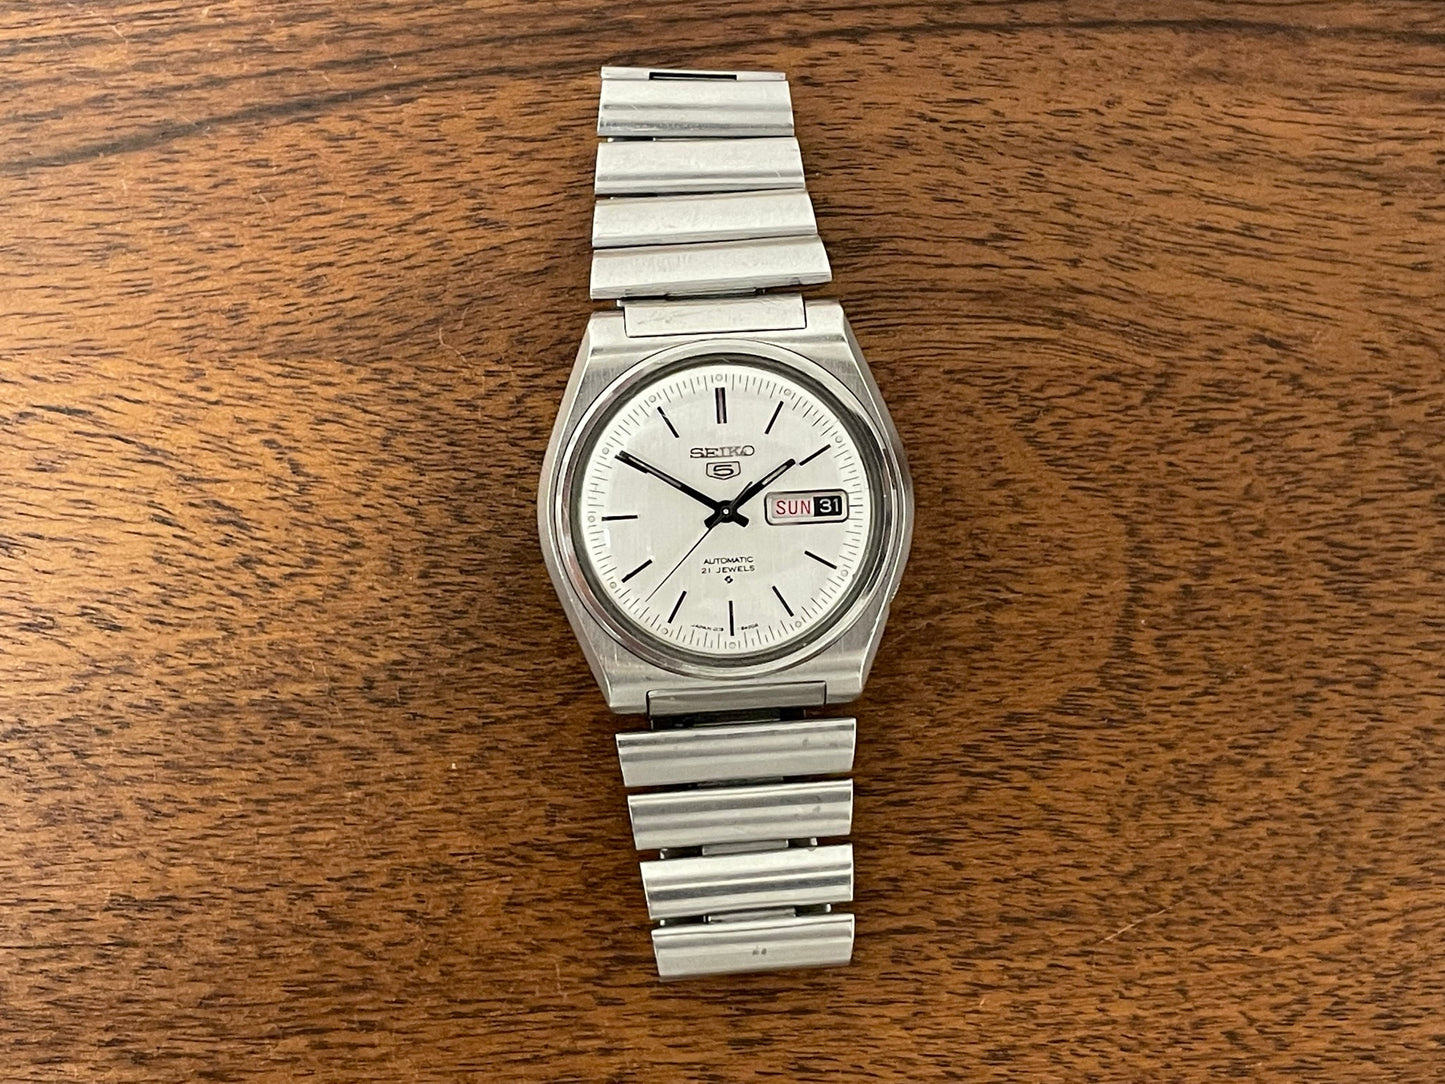 (1974) Seiko 5 Automatic 6119-8410 day & date feature (serviced)